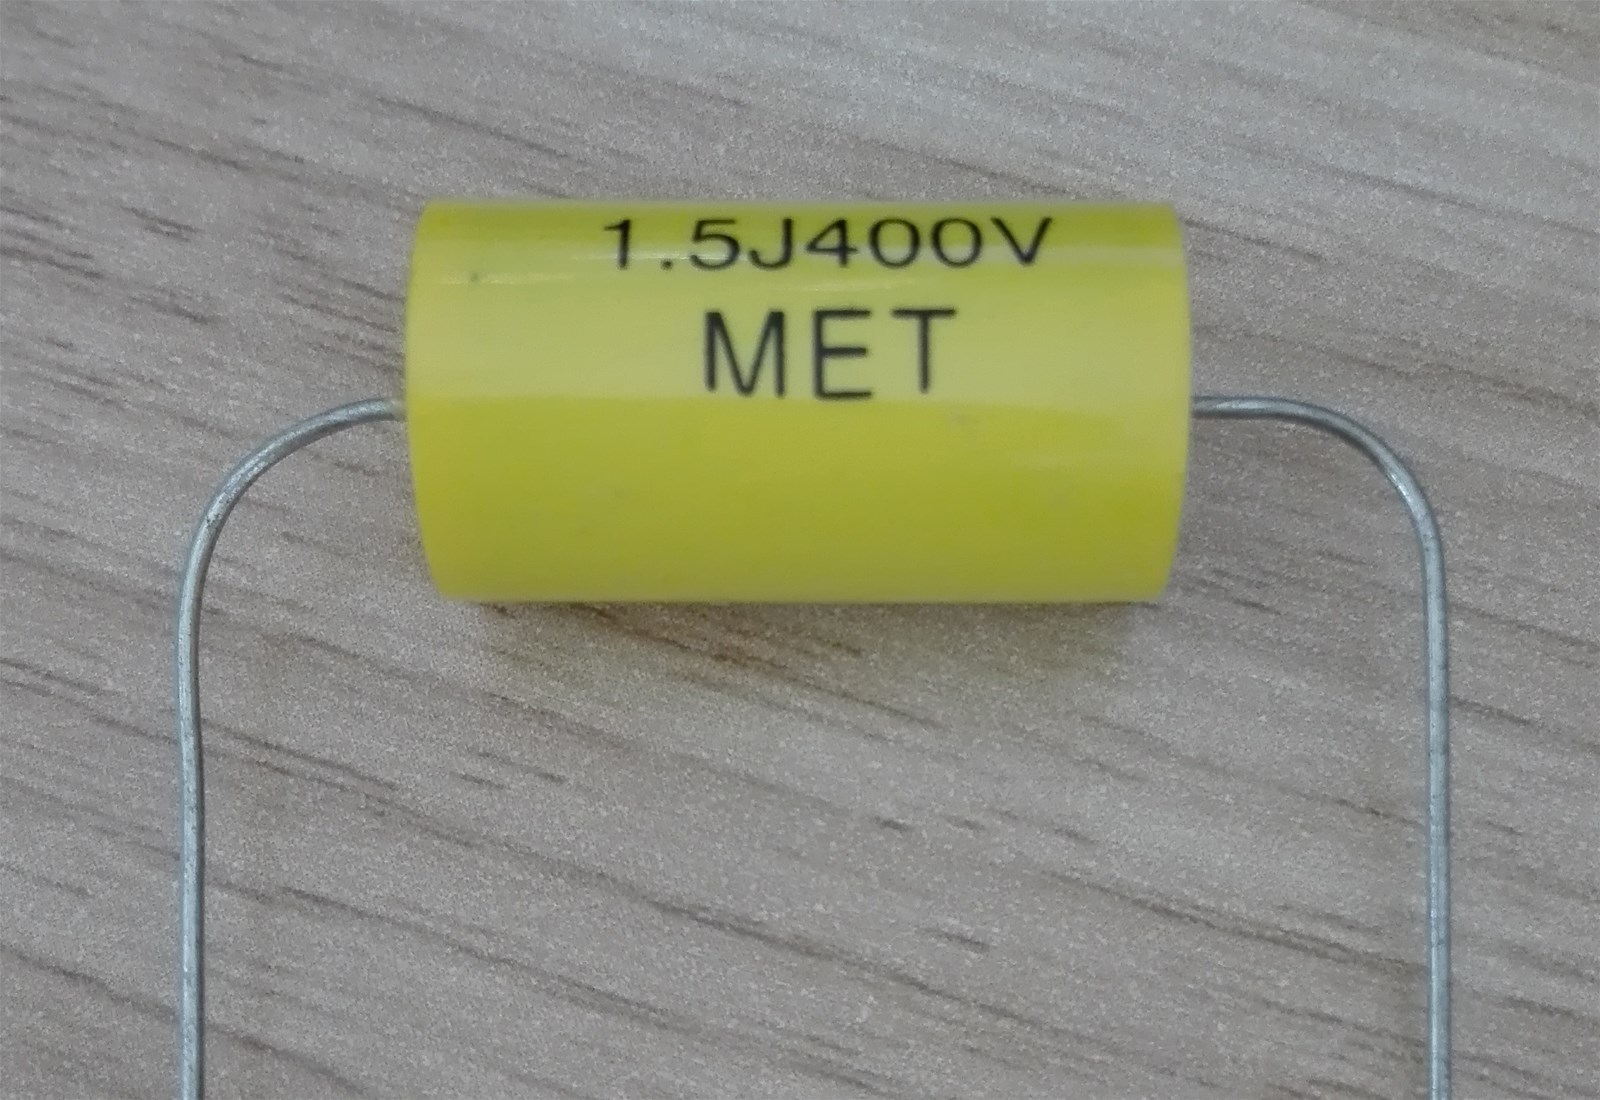 Axial Polyester film capacitor